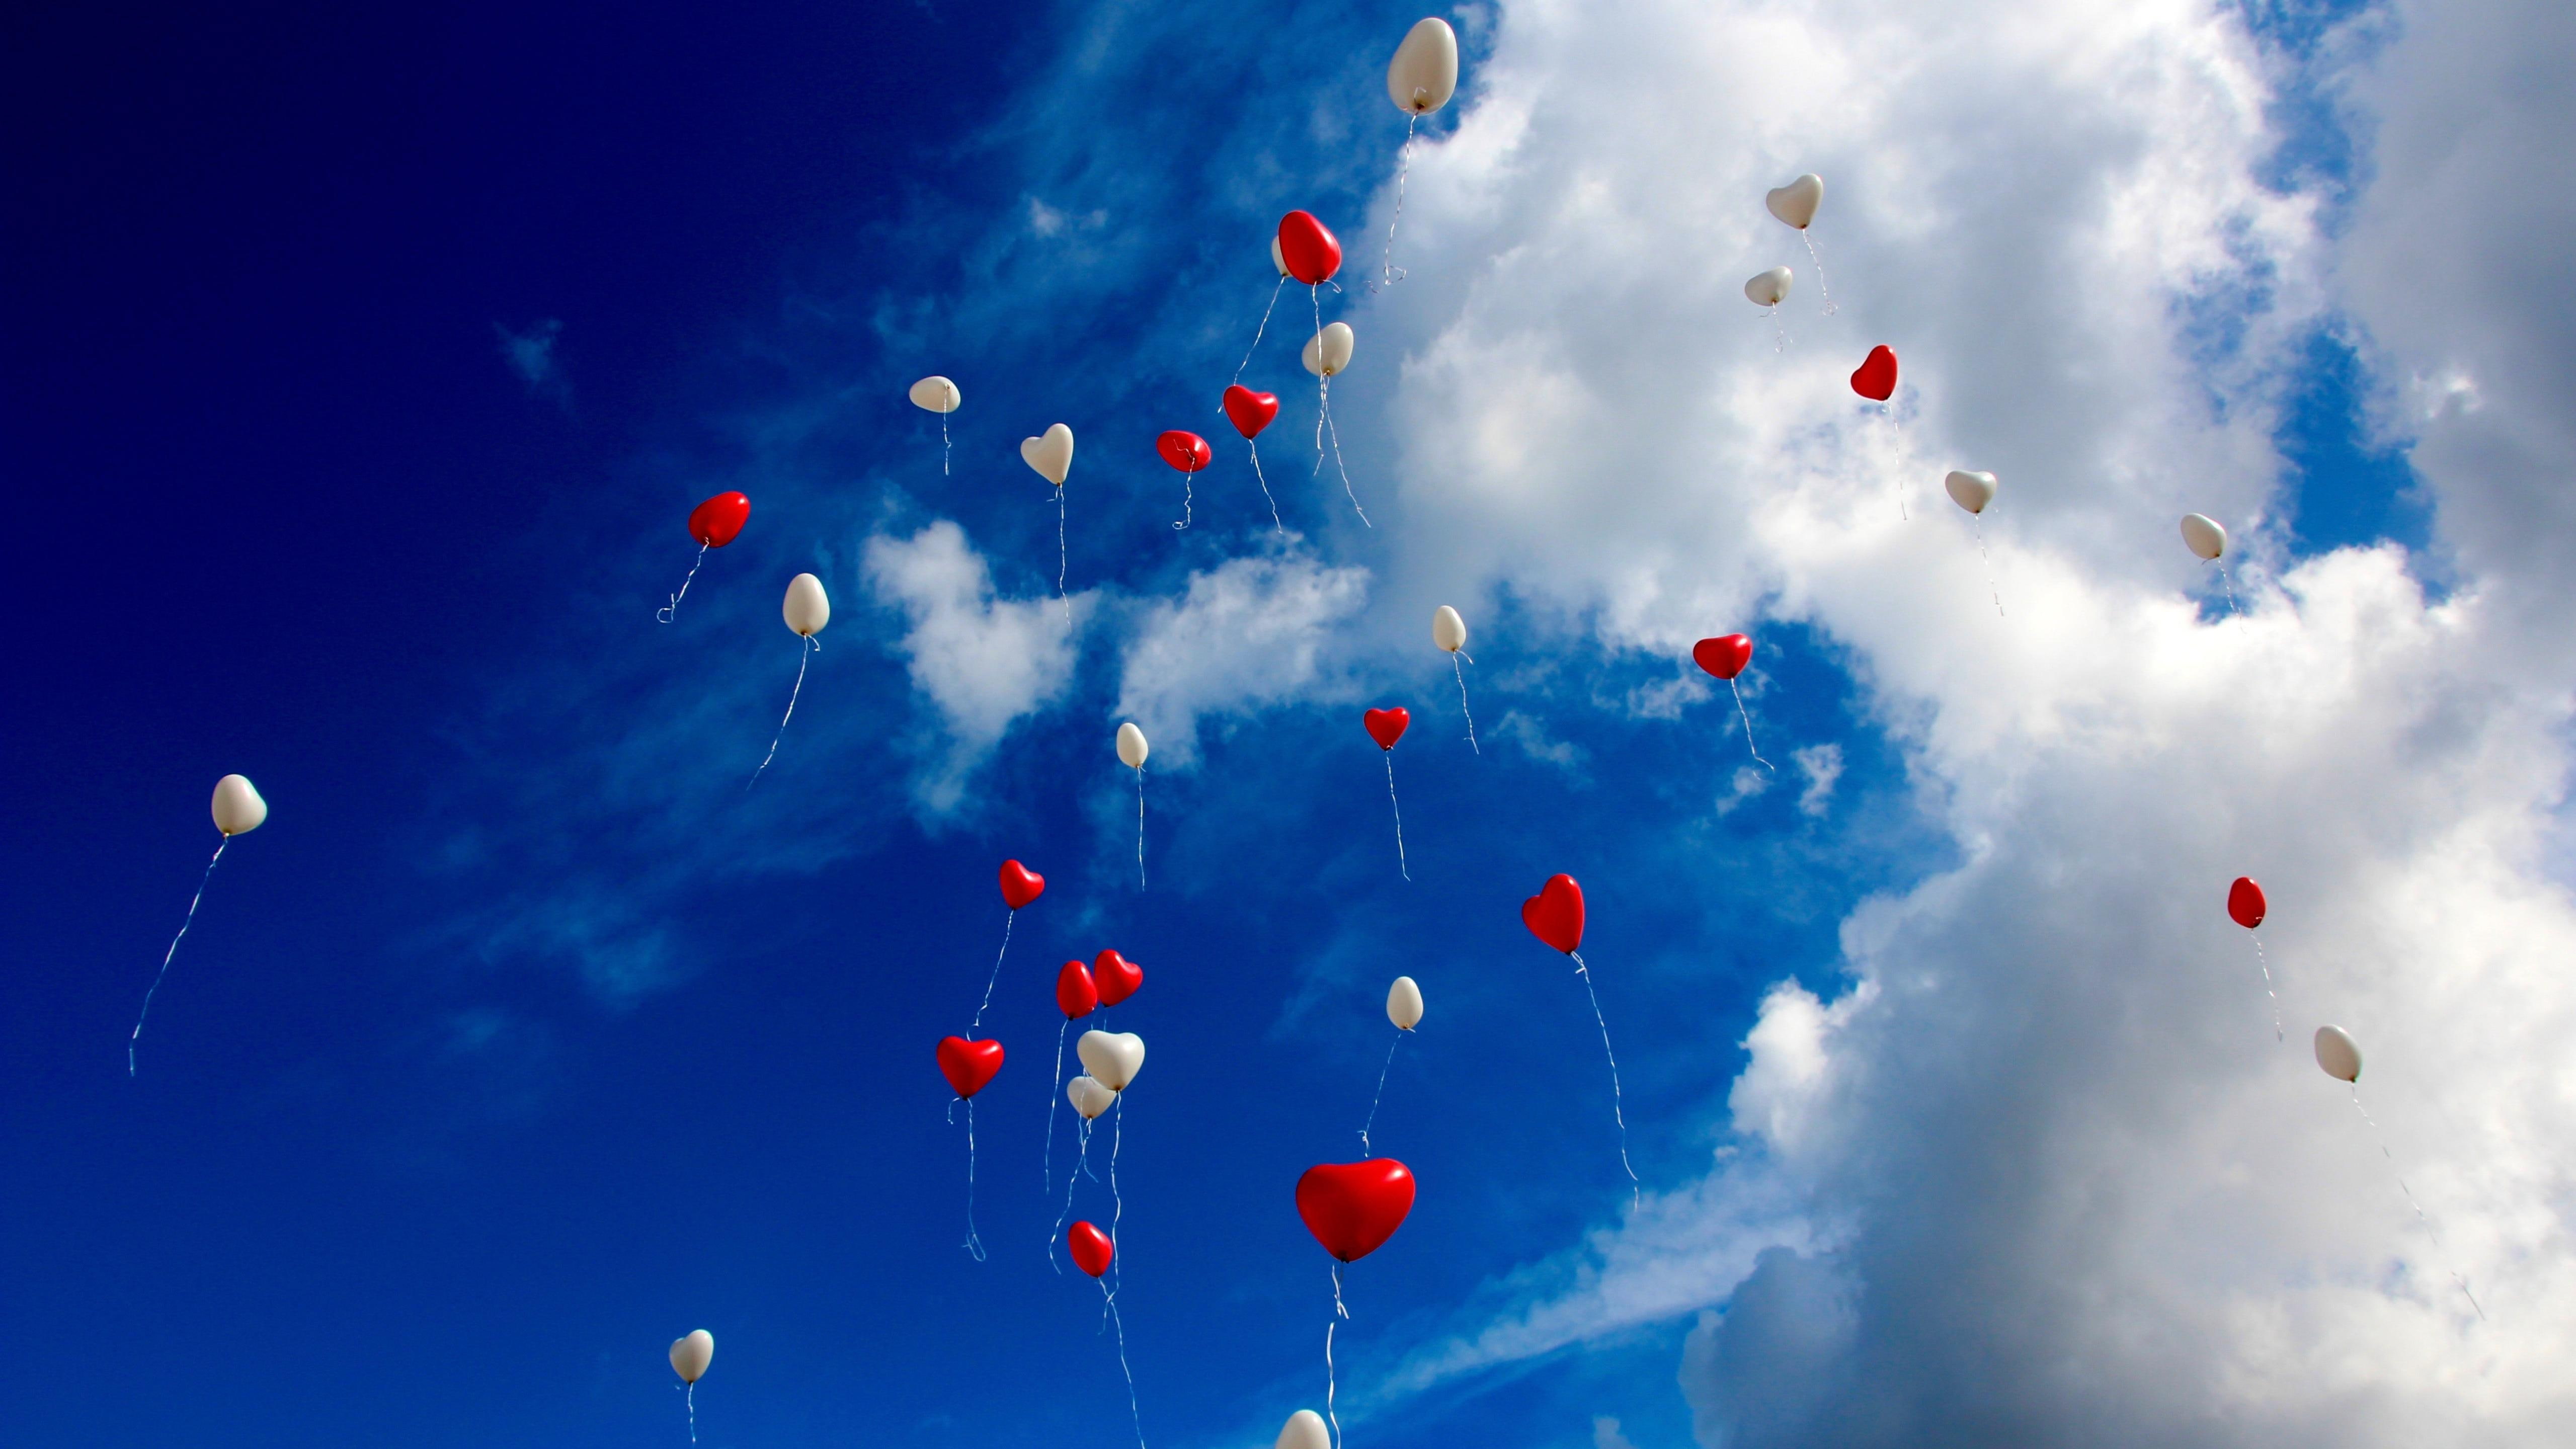 fluffy clouds, blue sky, balloons, flying, azure, heaven